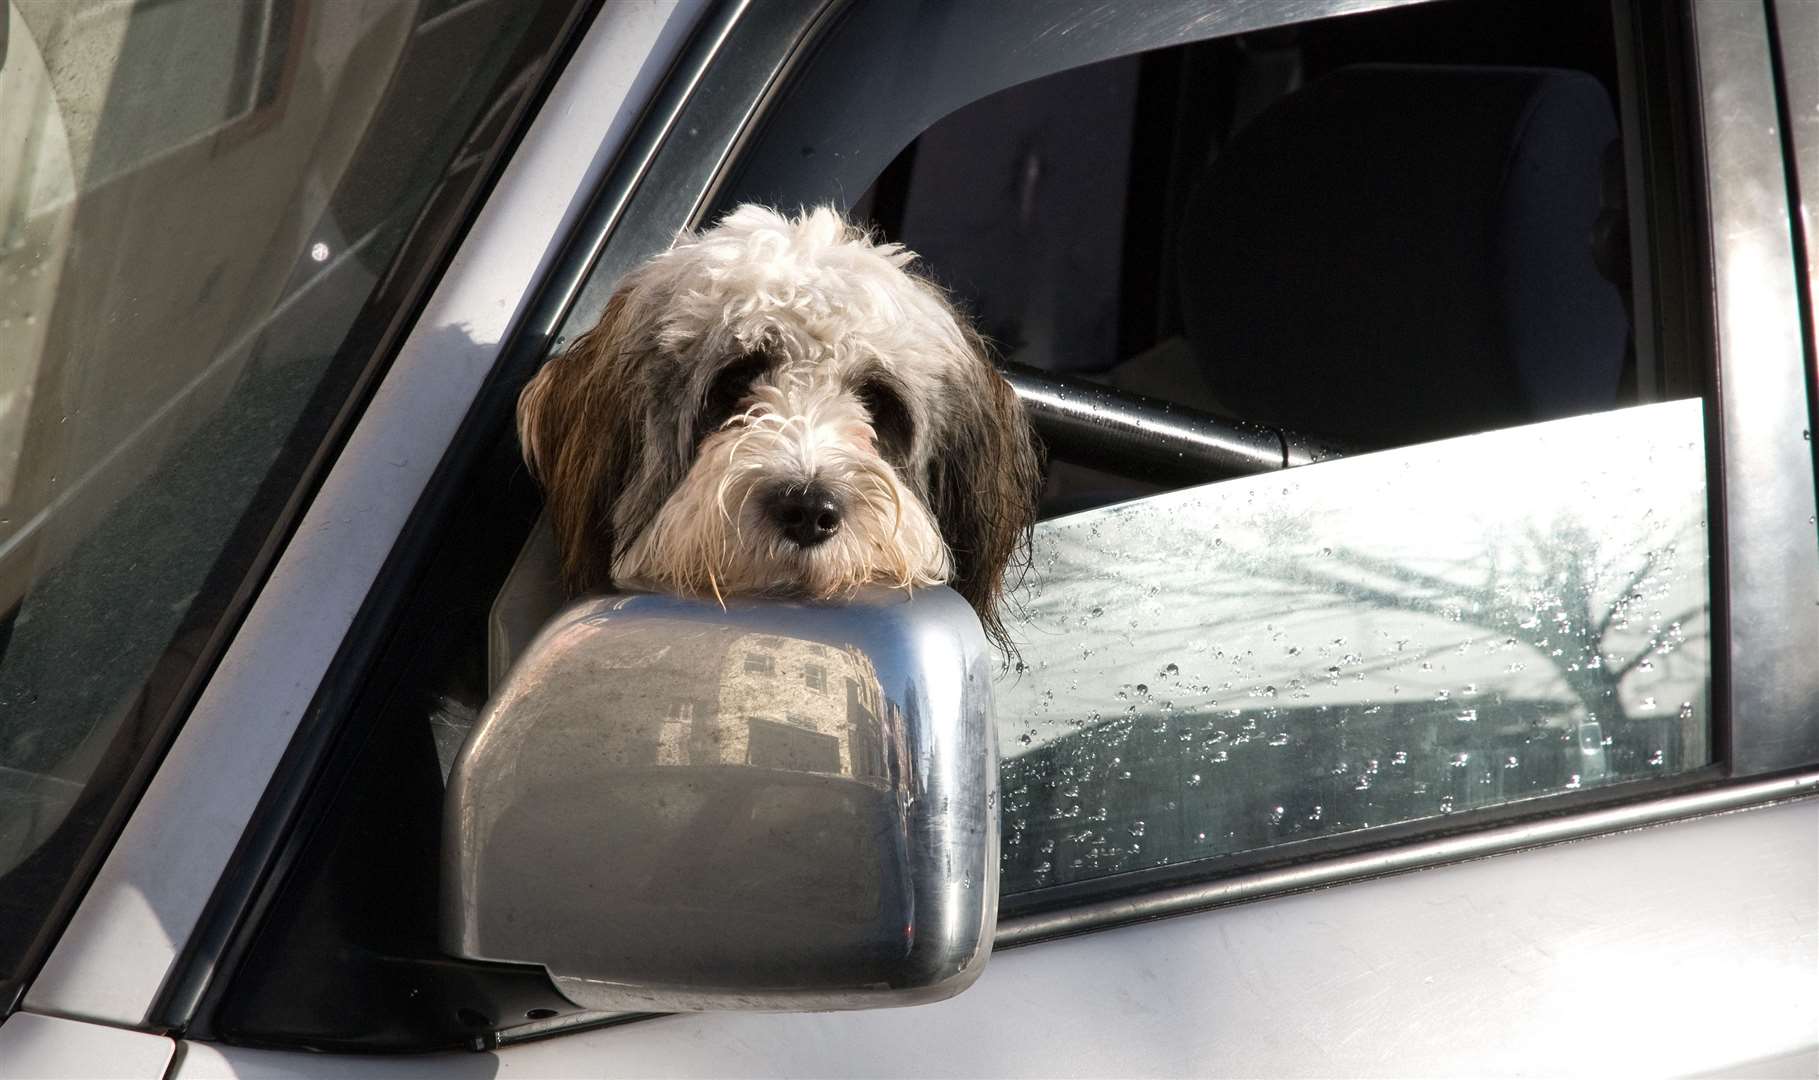 Do not let your dog obscure your view when you're driving